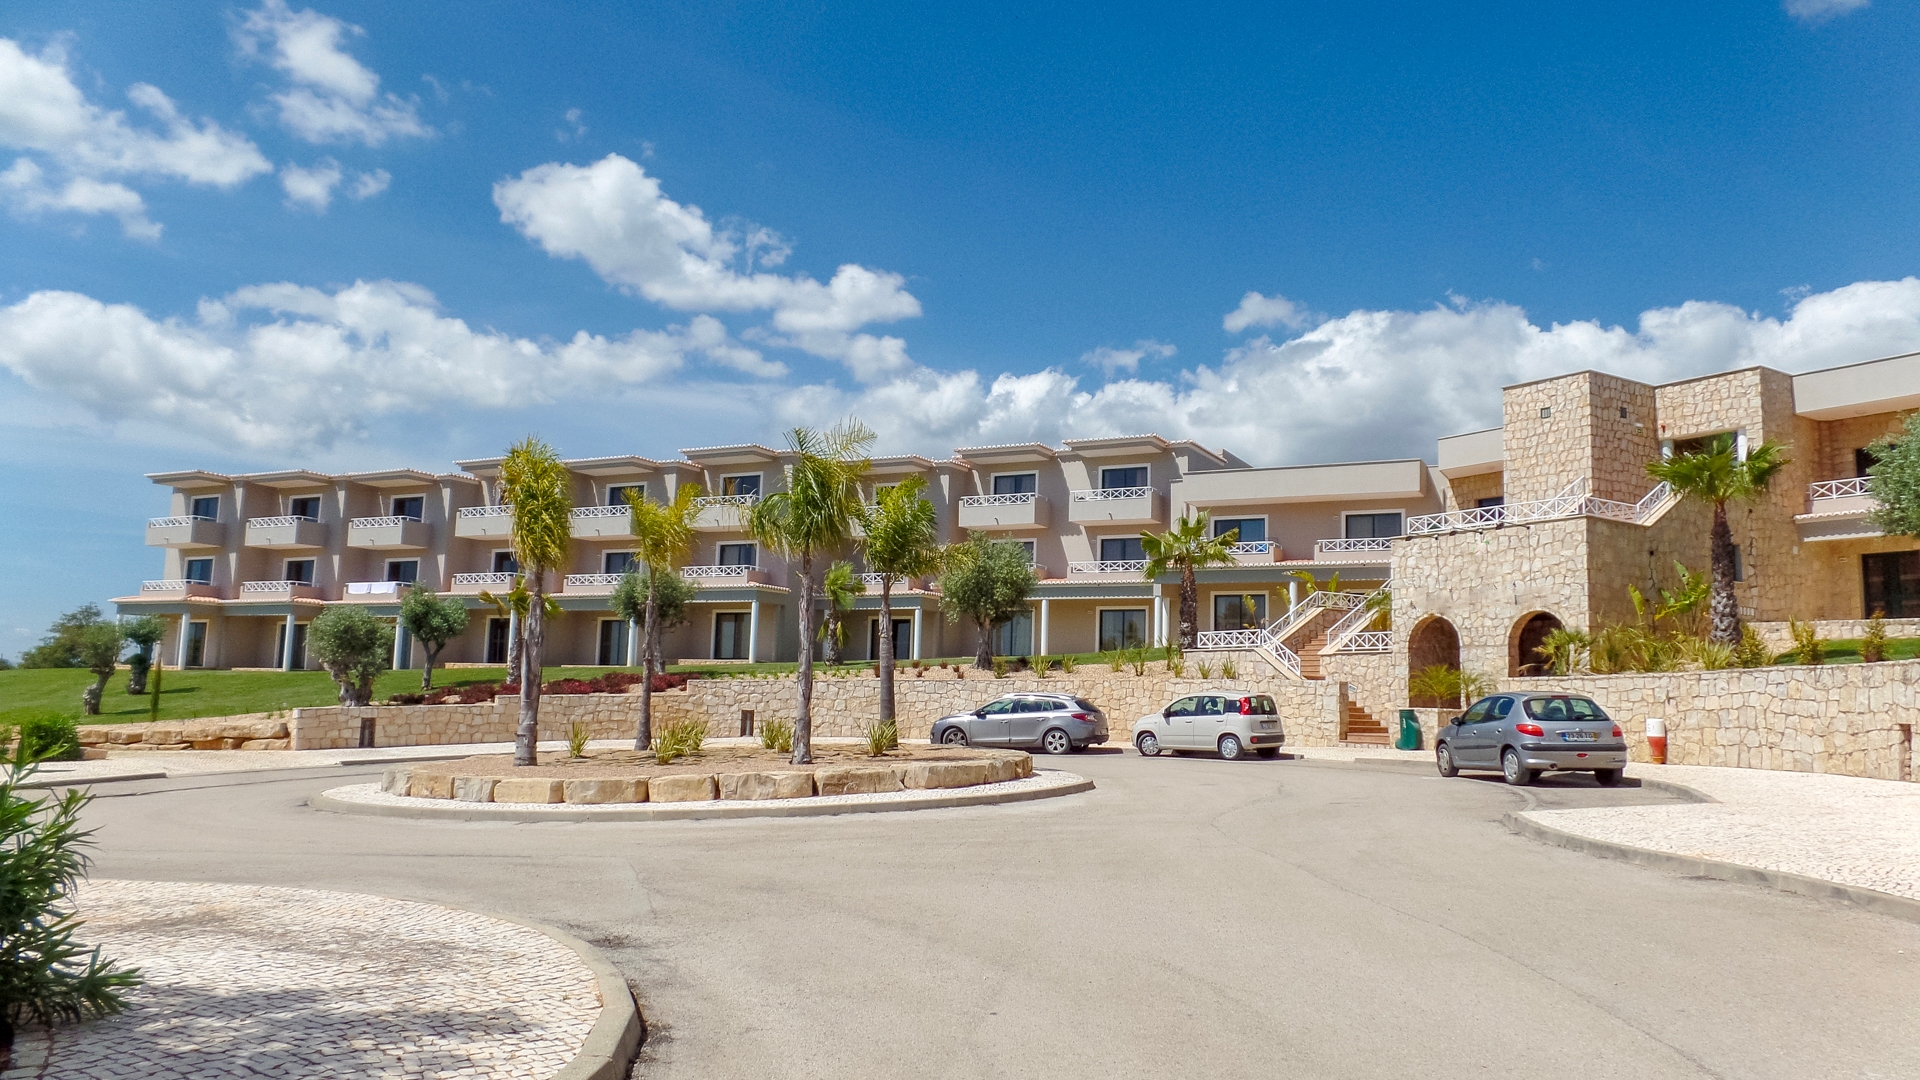 New 1 Bedroom Duplex Apartment on Golf Resort, near Carvoeiro | PCG1096 One bedroom one bathroom fully fitted and furnished apartment over 2 floors located within the popular Pestana Gramacho Residences golf resort in Carvoeiro. Rental program offering 5% Return on Investment per annum.